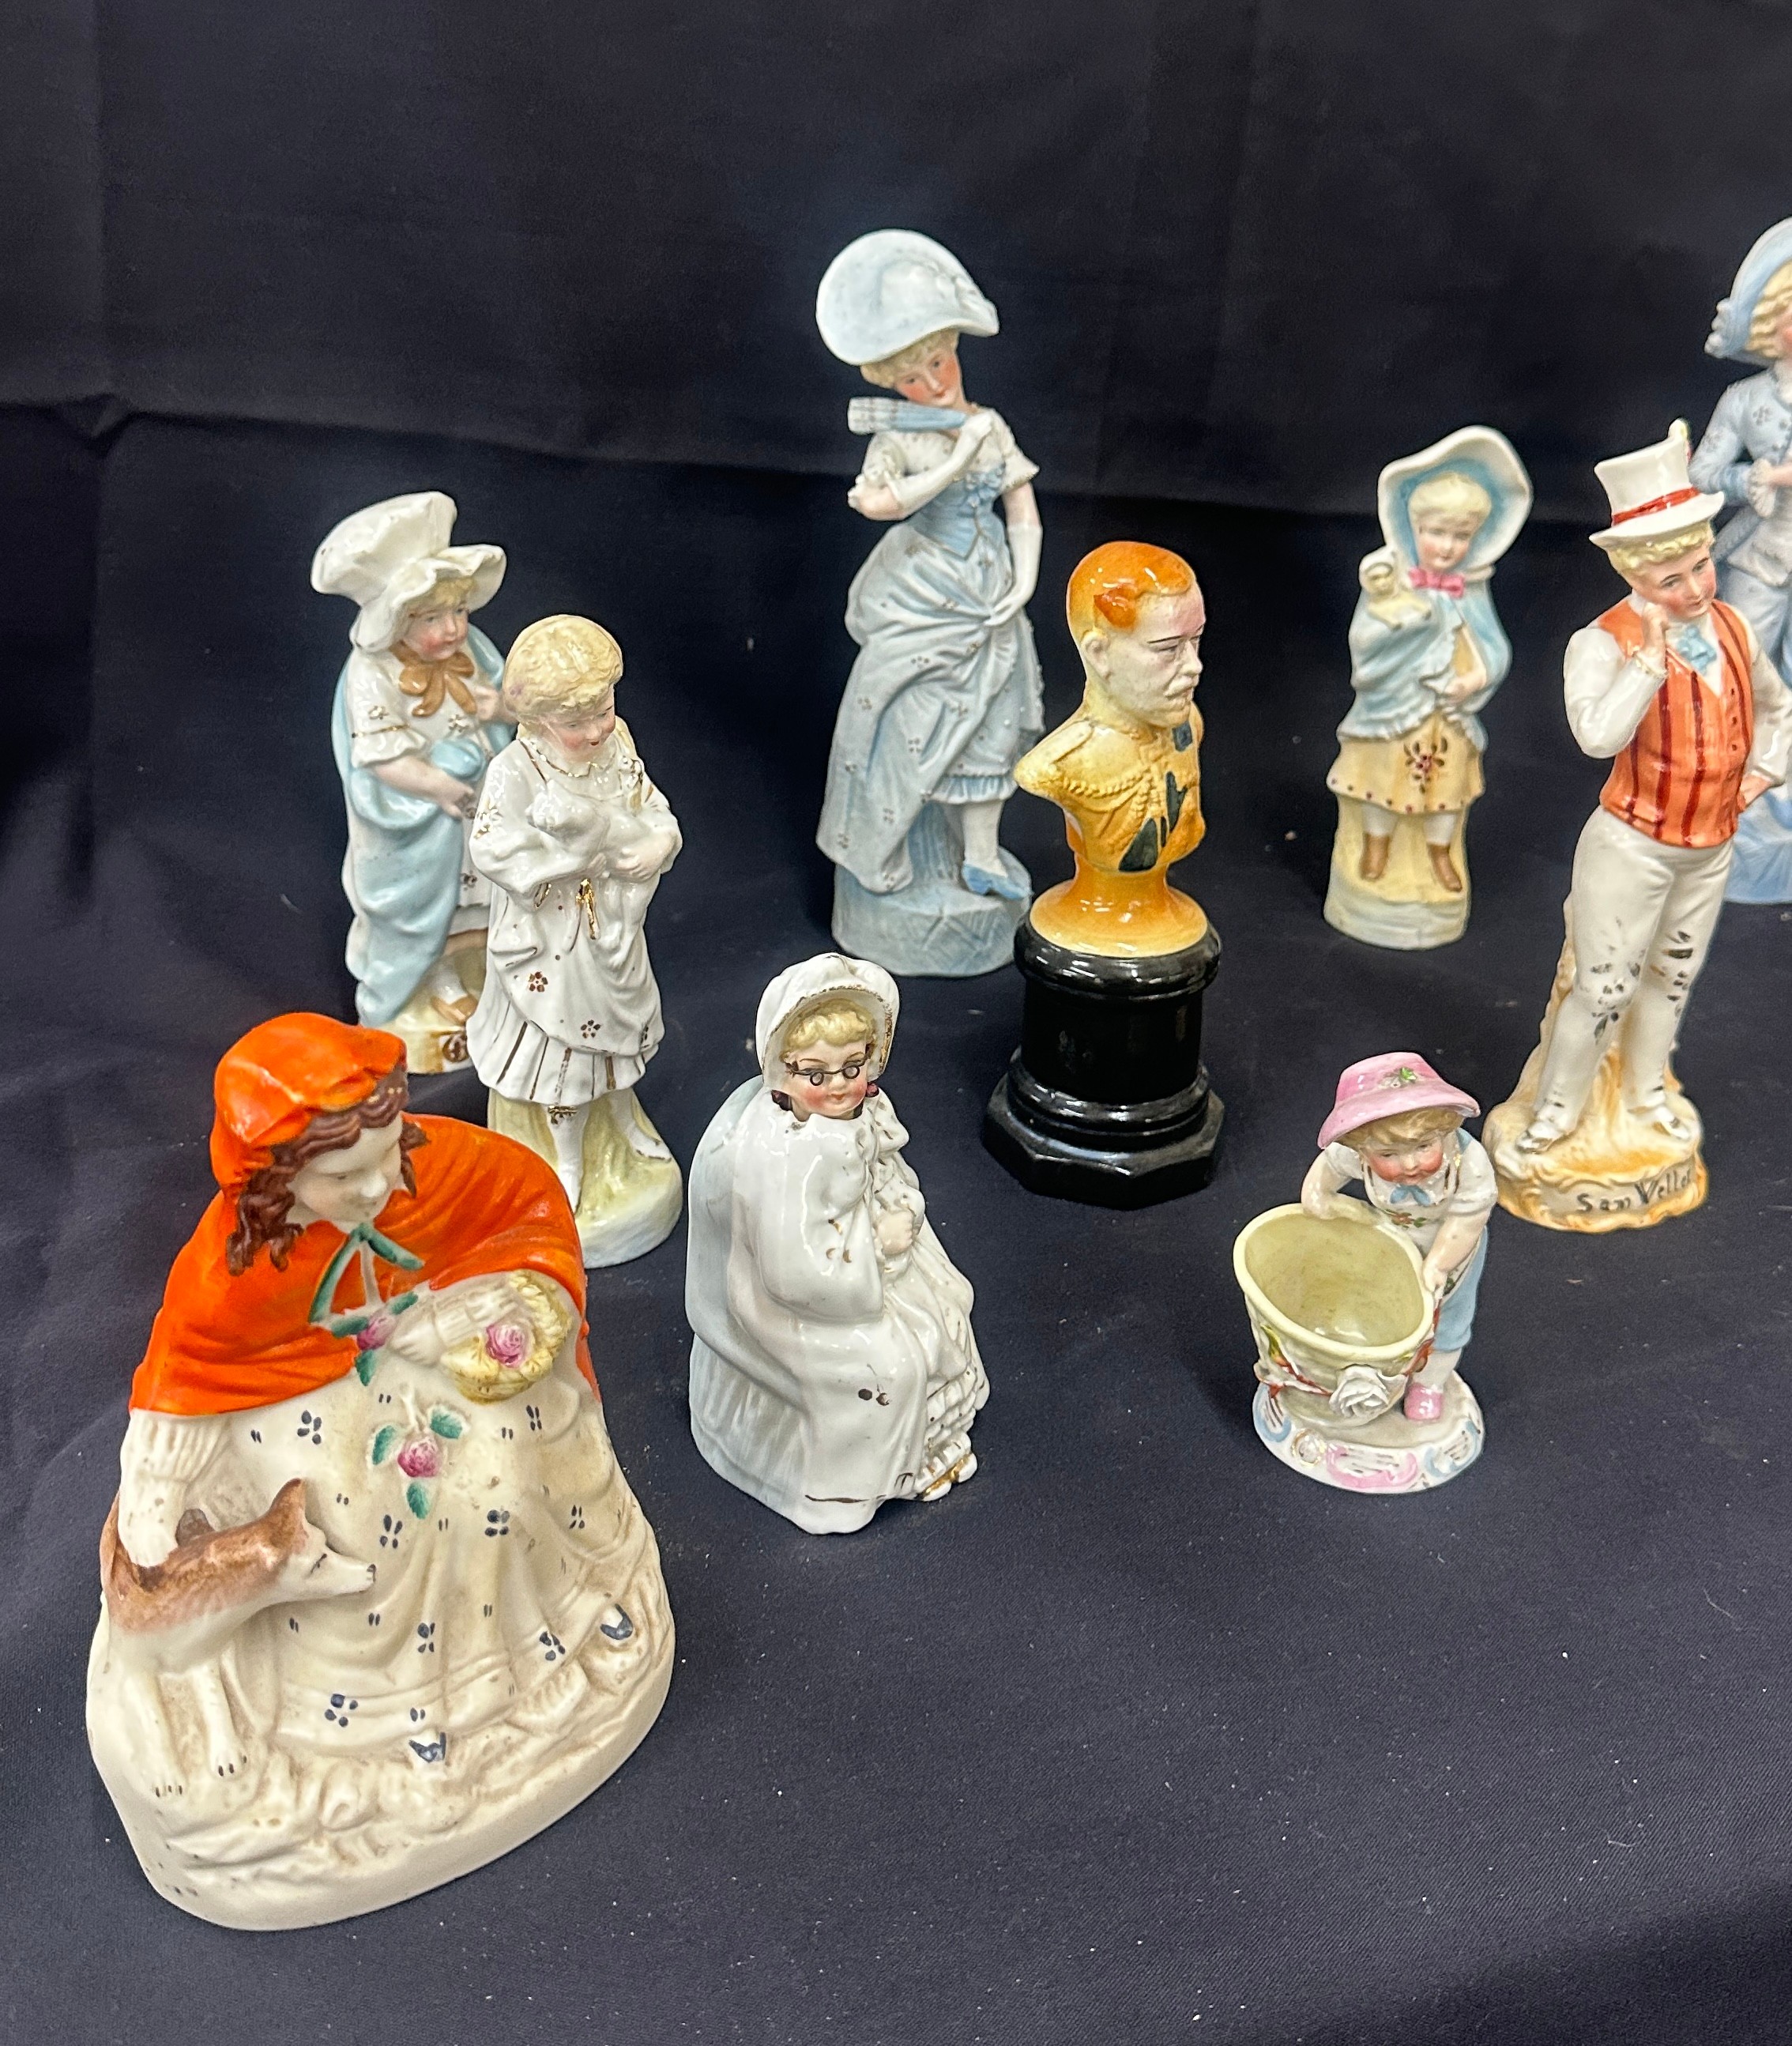 Quantity of antique bisque German figures tallest measures approx 10 inches - Image 2 of 5